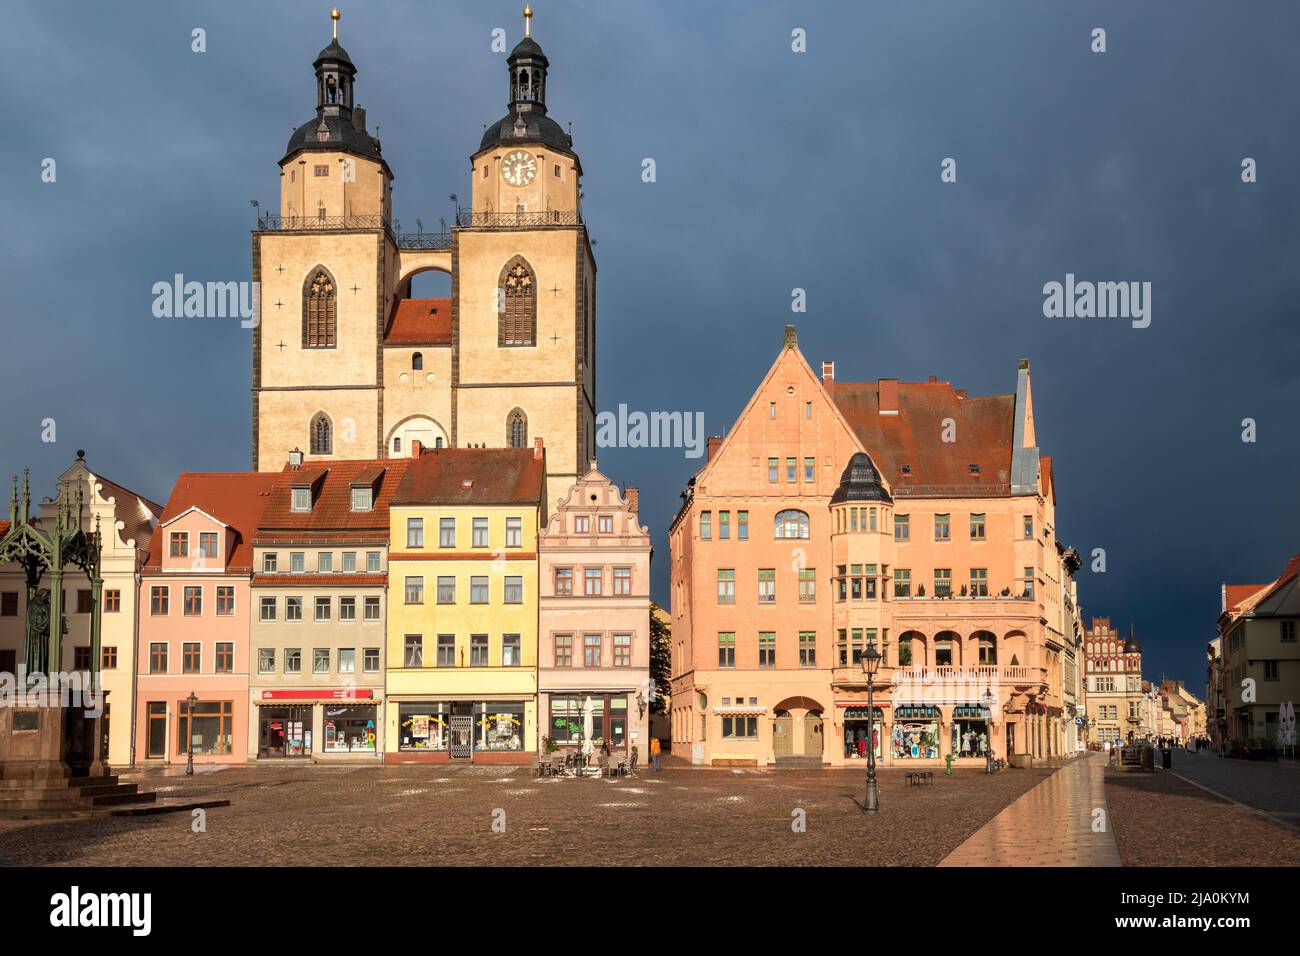 View on the market square with town hall and Stadtkirche Wittenberg in Lutherstadt Wittenberg city, Saxeny-Anhalt. Wittenberg, Germany - April 26, 201 Stock Photo